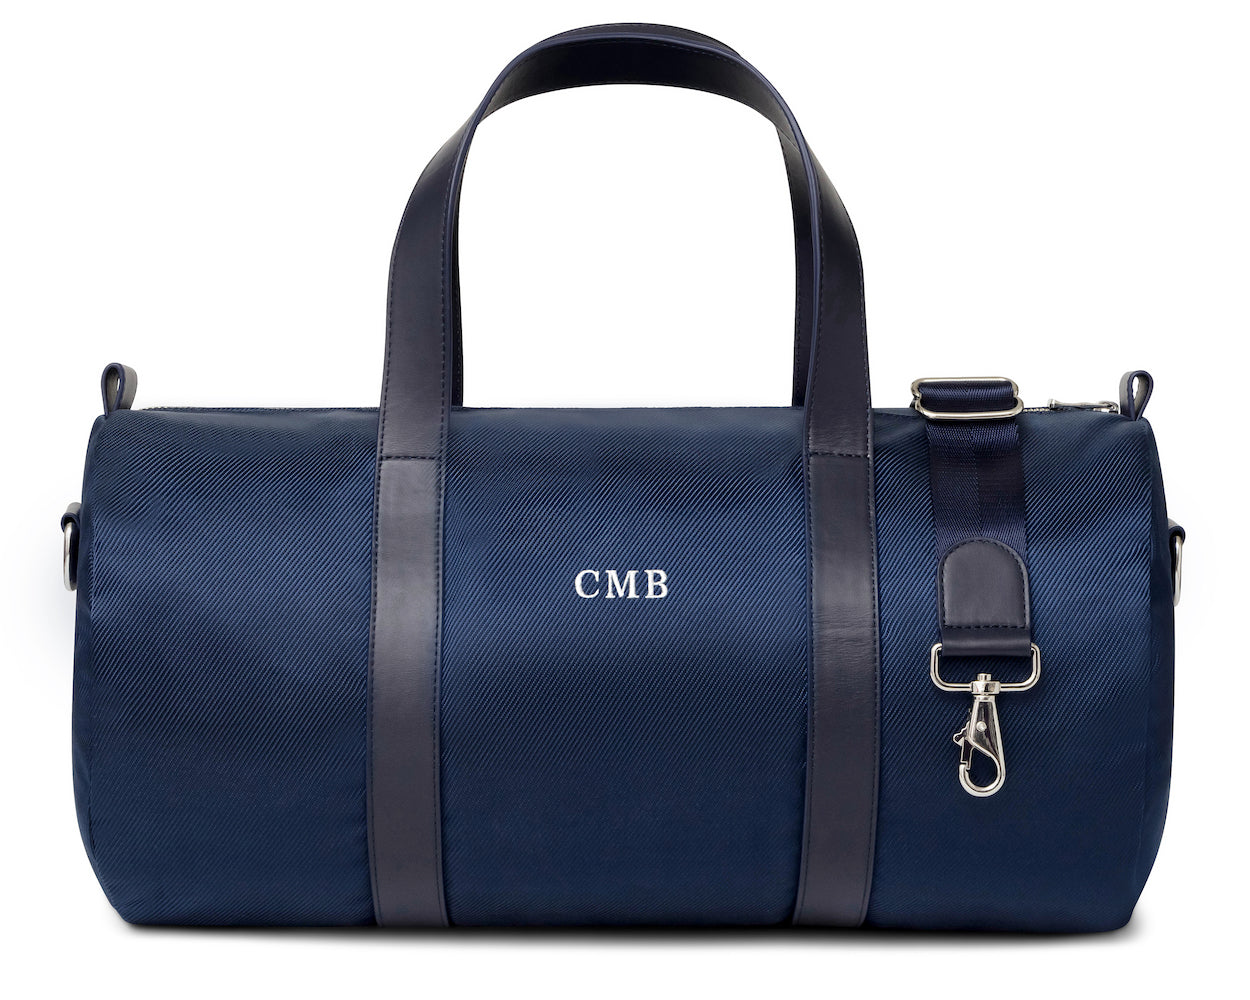 Navy banker gym bag with dark leather straps and embroidered lettering from Holderness and Bourne.